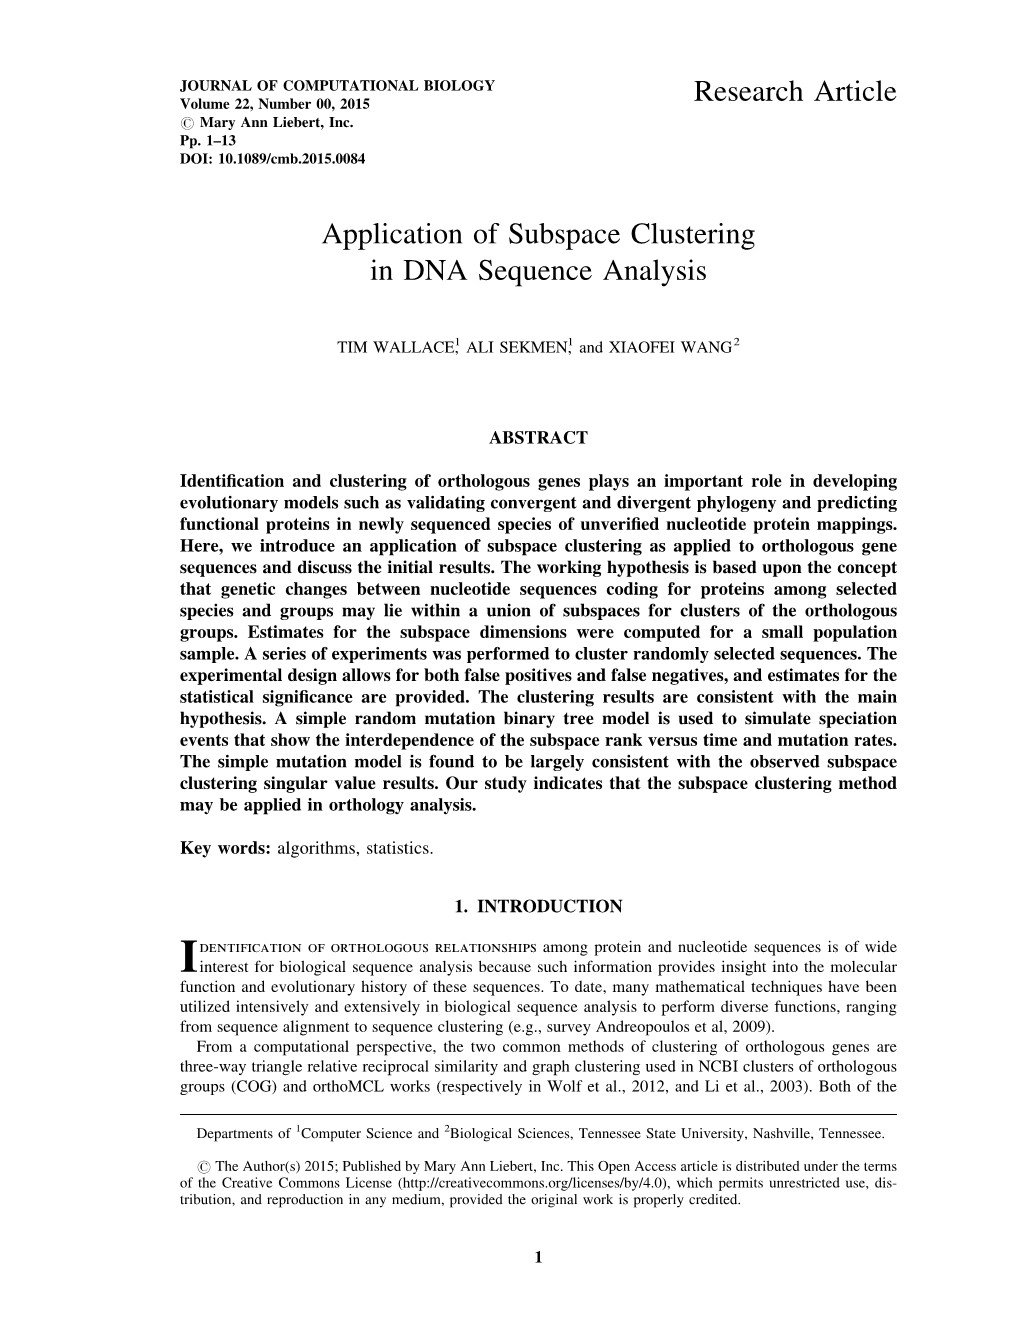 Application of Subspace Clustering in DNA Sequence Analysis